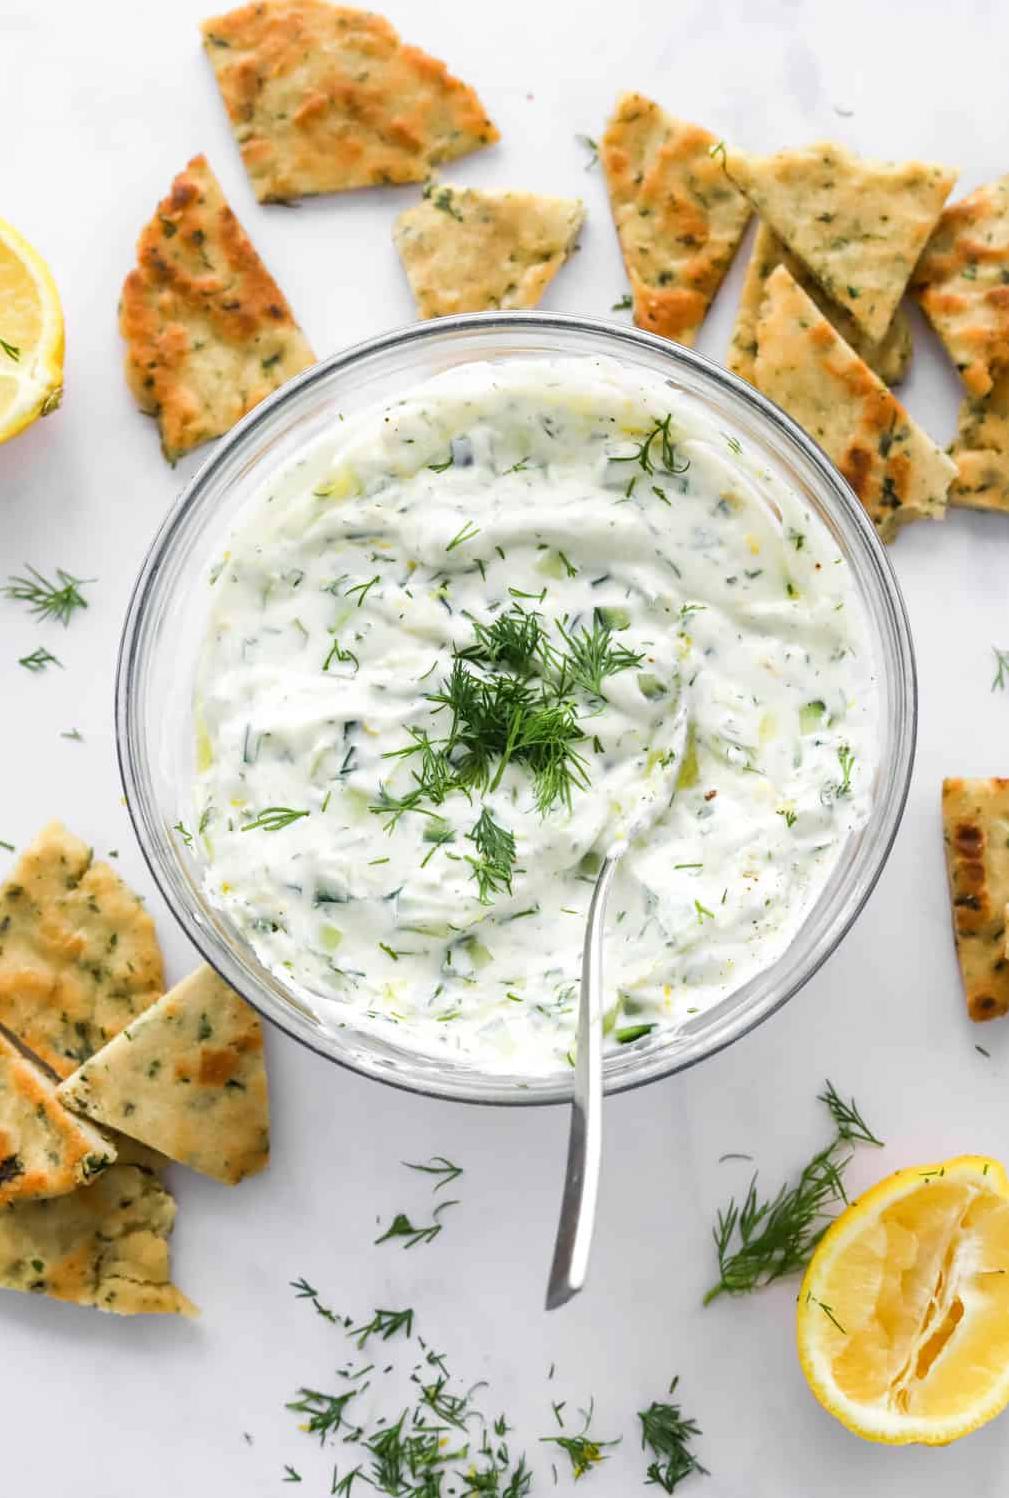  Step up your sauce game with this easy tzatziki recipe.